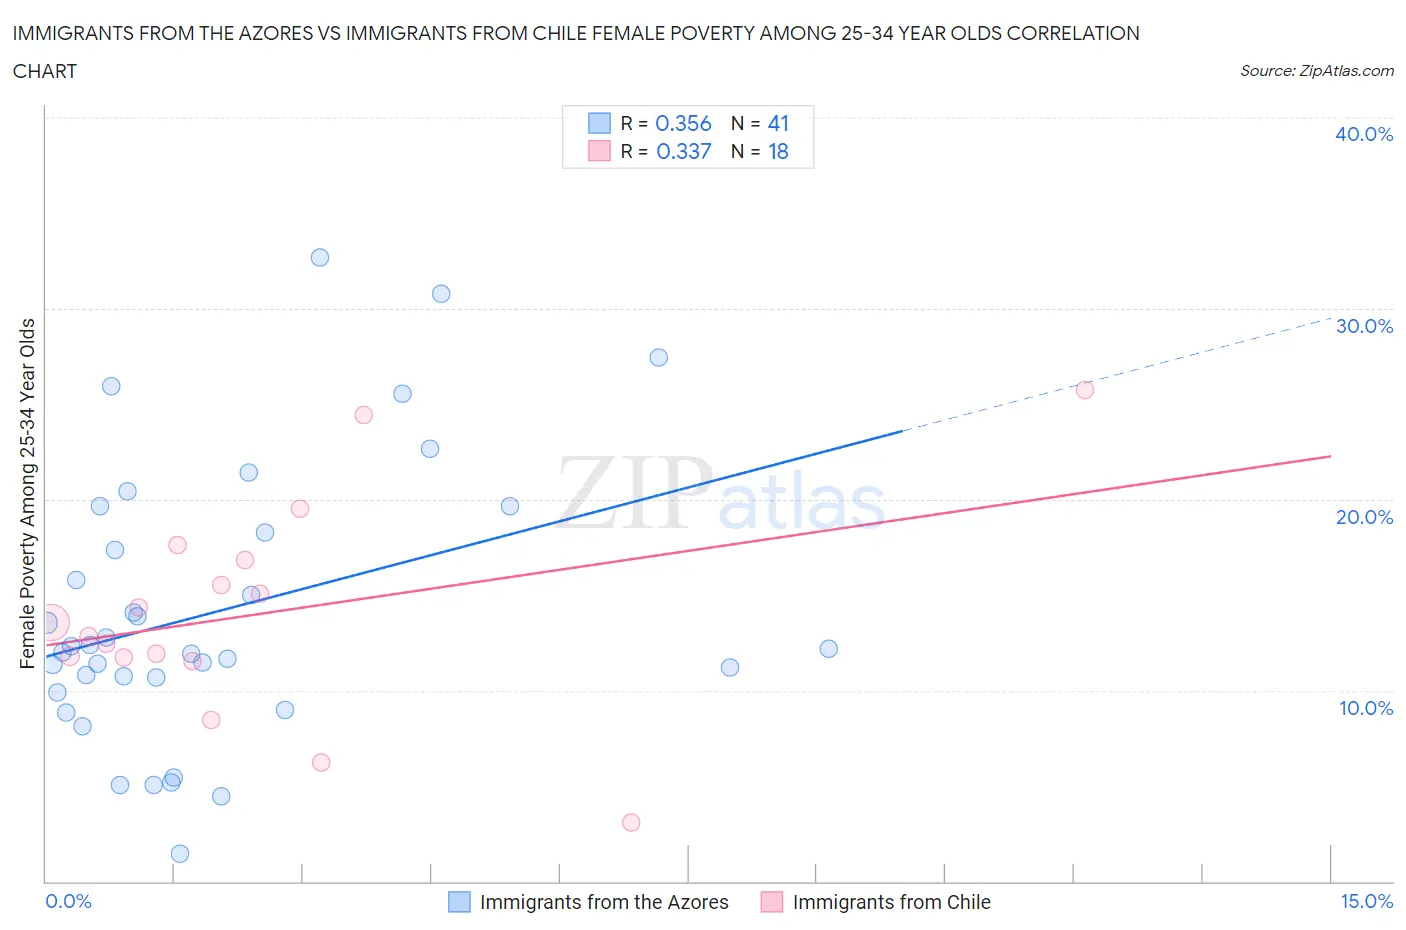 Immigrants from the Azores vs Immigrants from Chile Female Poverty Among 25-34 Year Olds